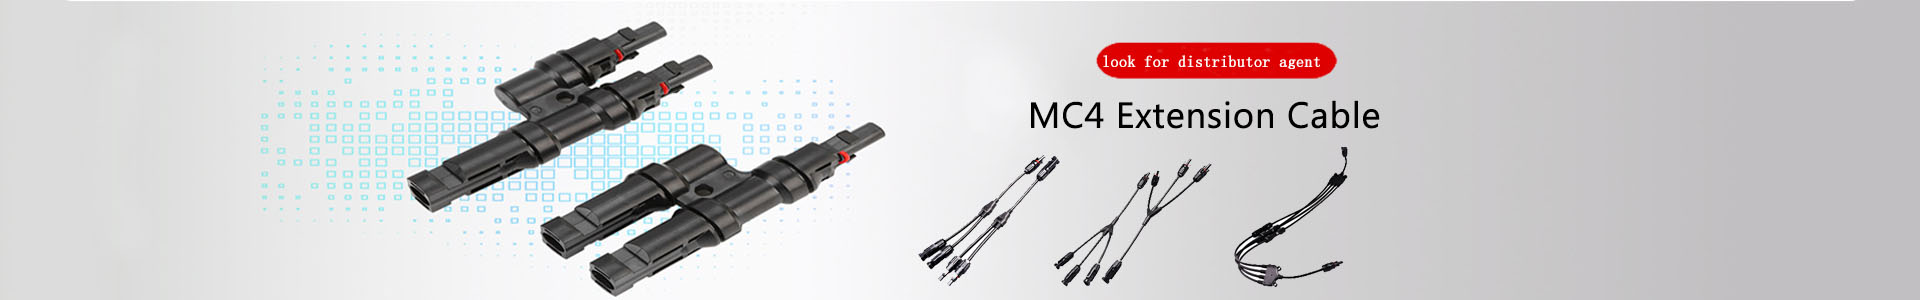 Pakistan Solar photovoltaic power generation project-Case-Solar | solar connector,solar branch connector,diode fuse connector,MC4 extnsion cable,H1Z2Z2 solar cable, UL4703 solar cable | Leading manufacturer and supplier of solar pv cables and connectors